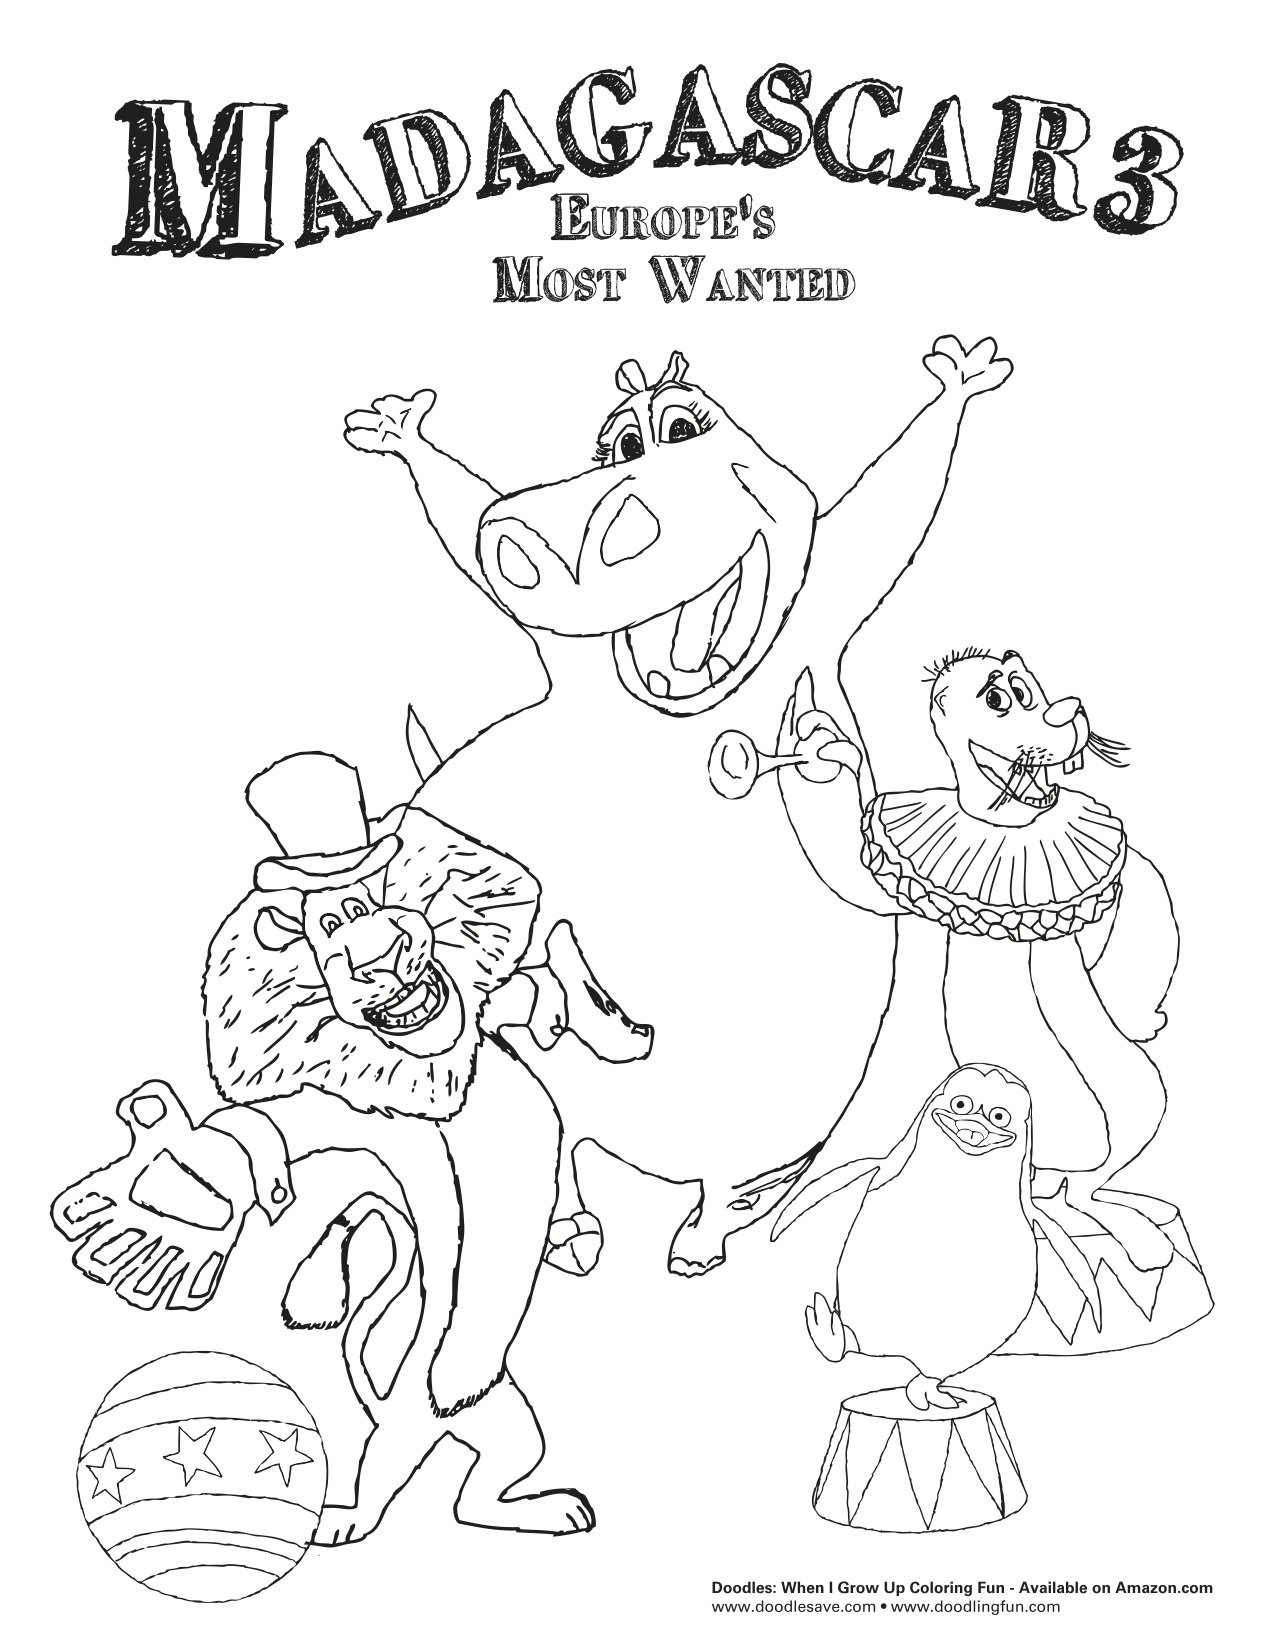 Humorous theater poster coloring book